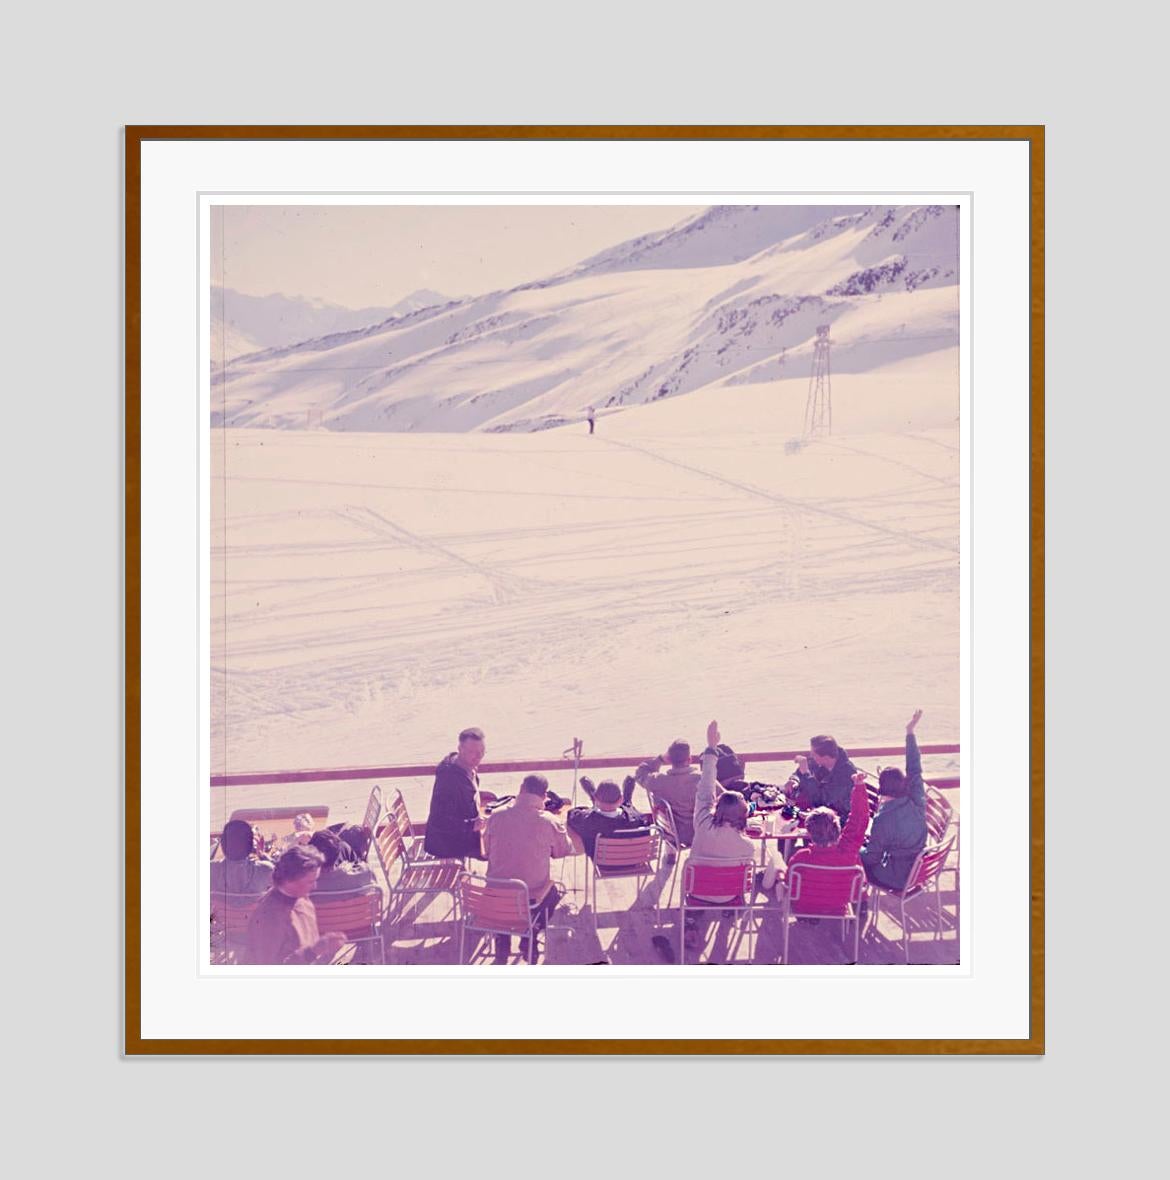 Mountain Top

1954

Skiers enjoy mountain top drinks, Klosters, 1954

by Toni Frissell

30 x 30